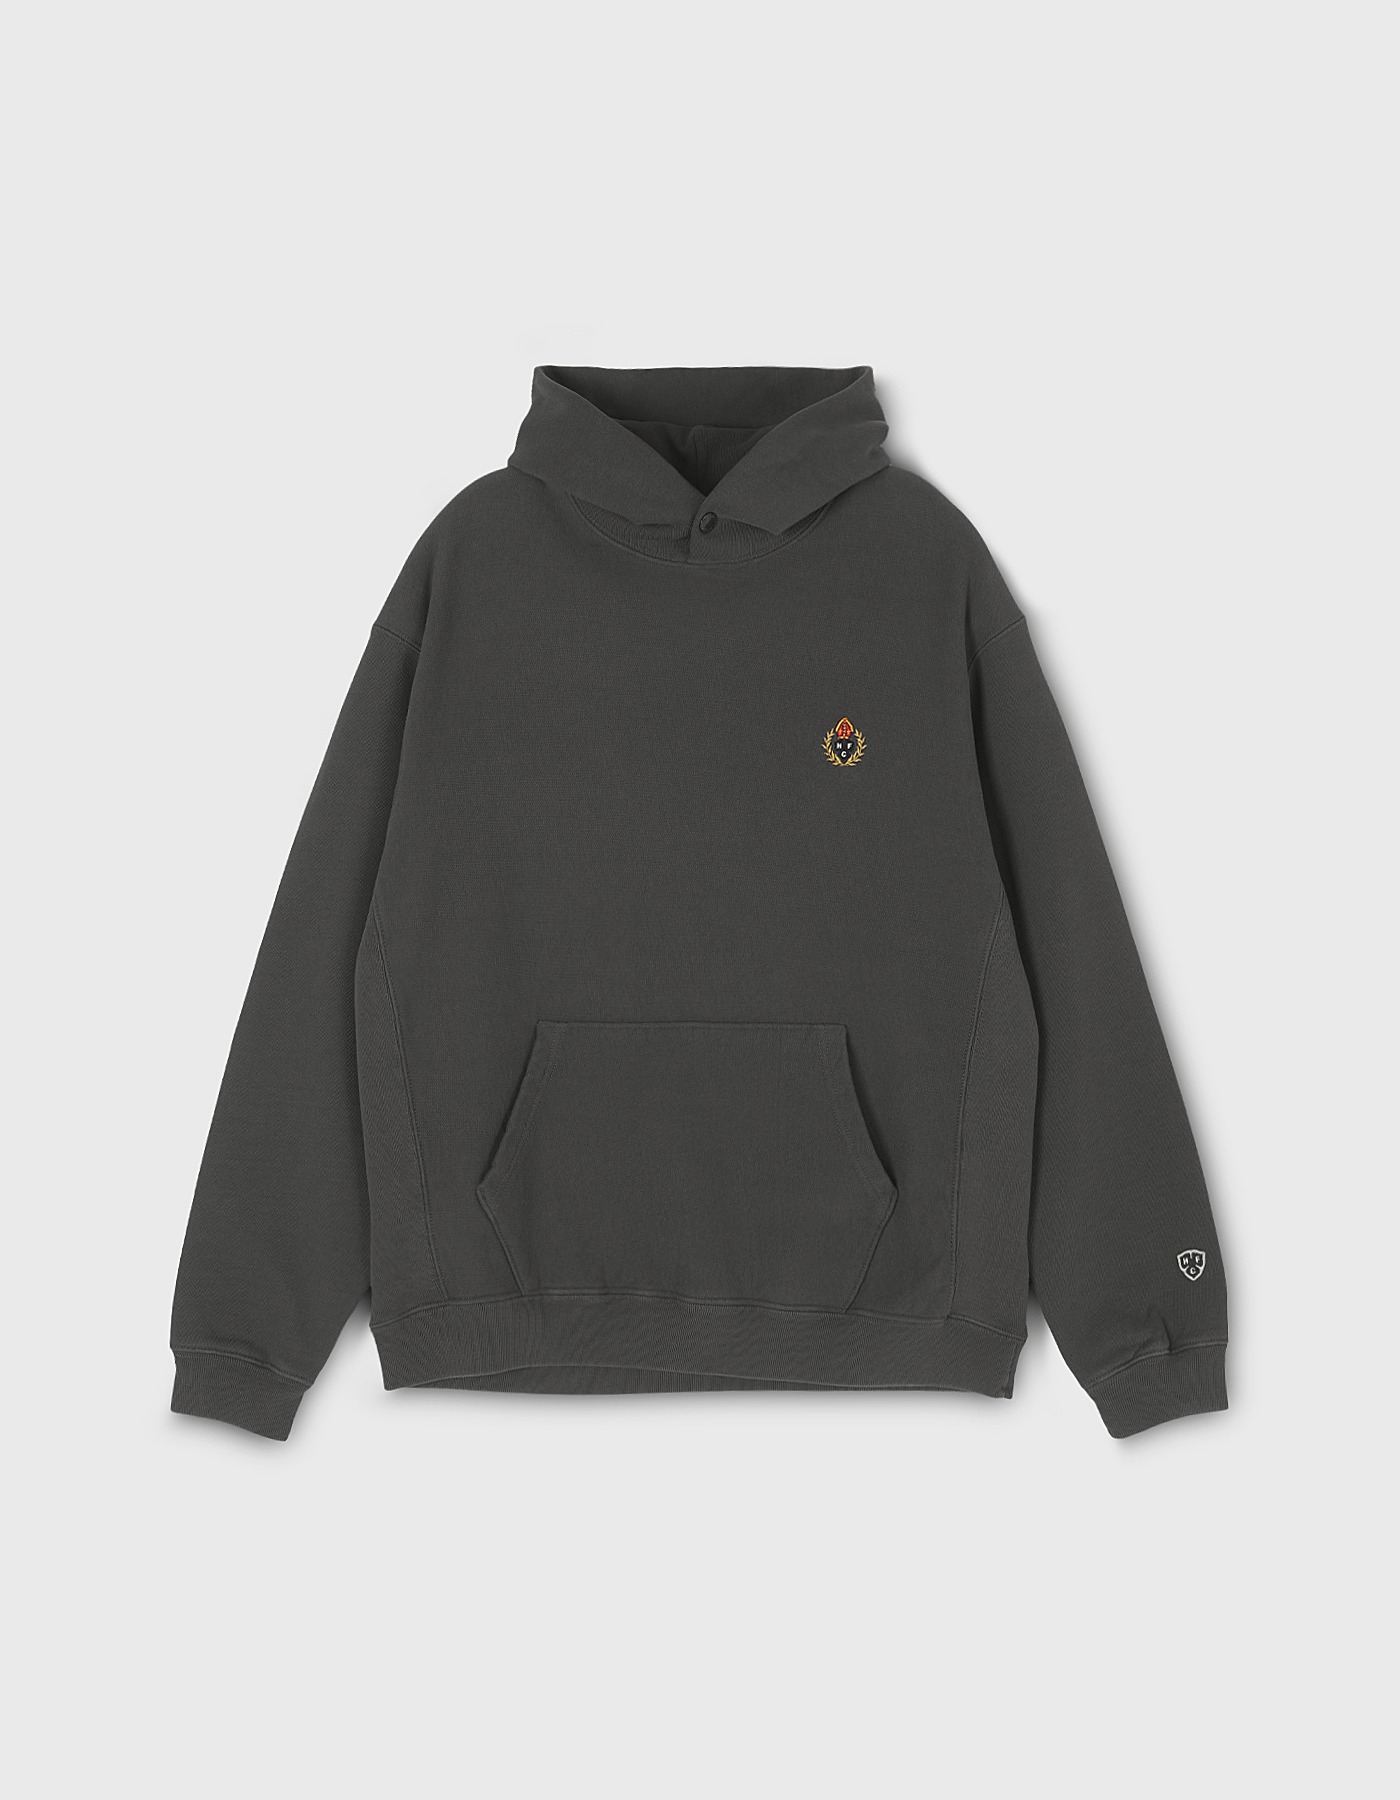 CREST 226 REVERSE HOODIE / Charcoal